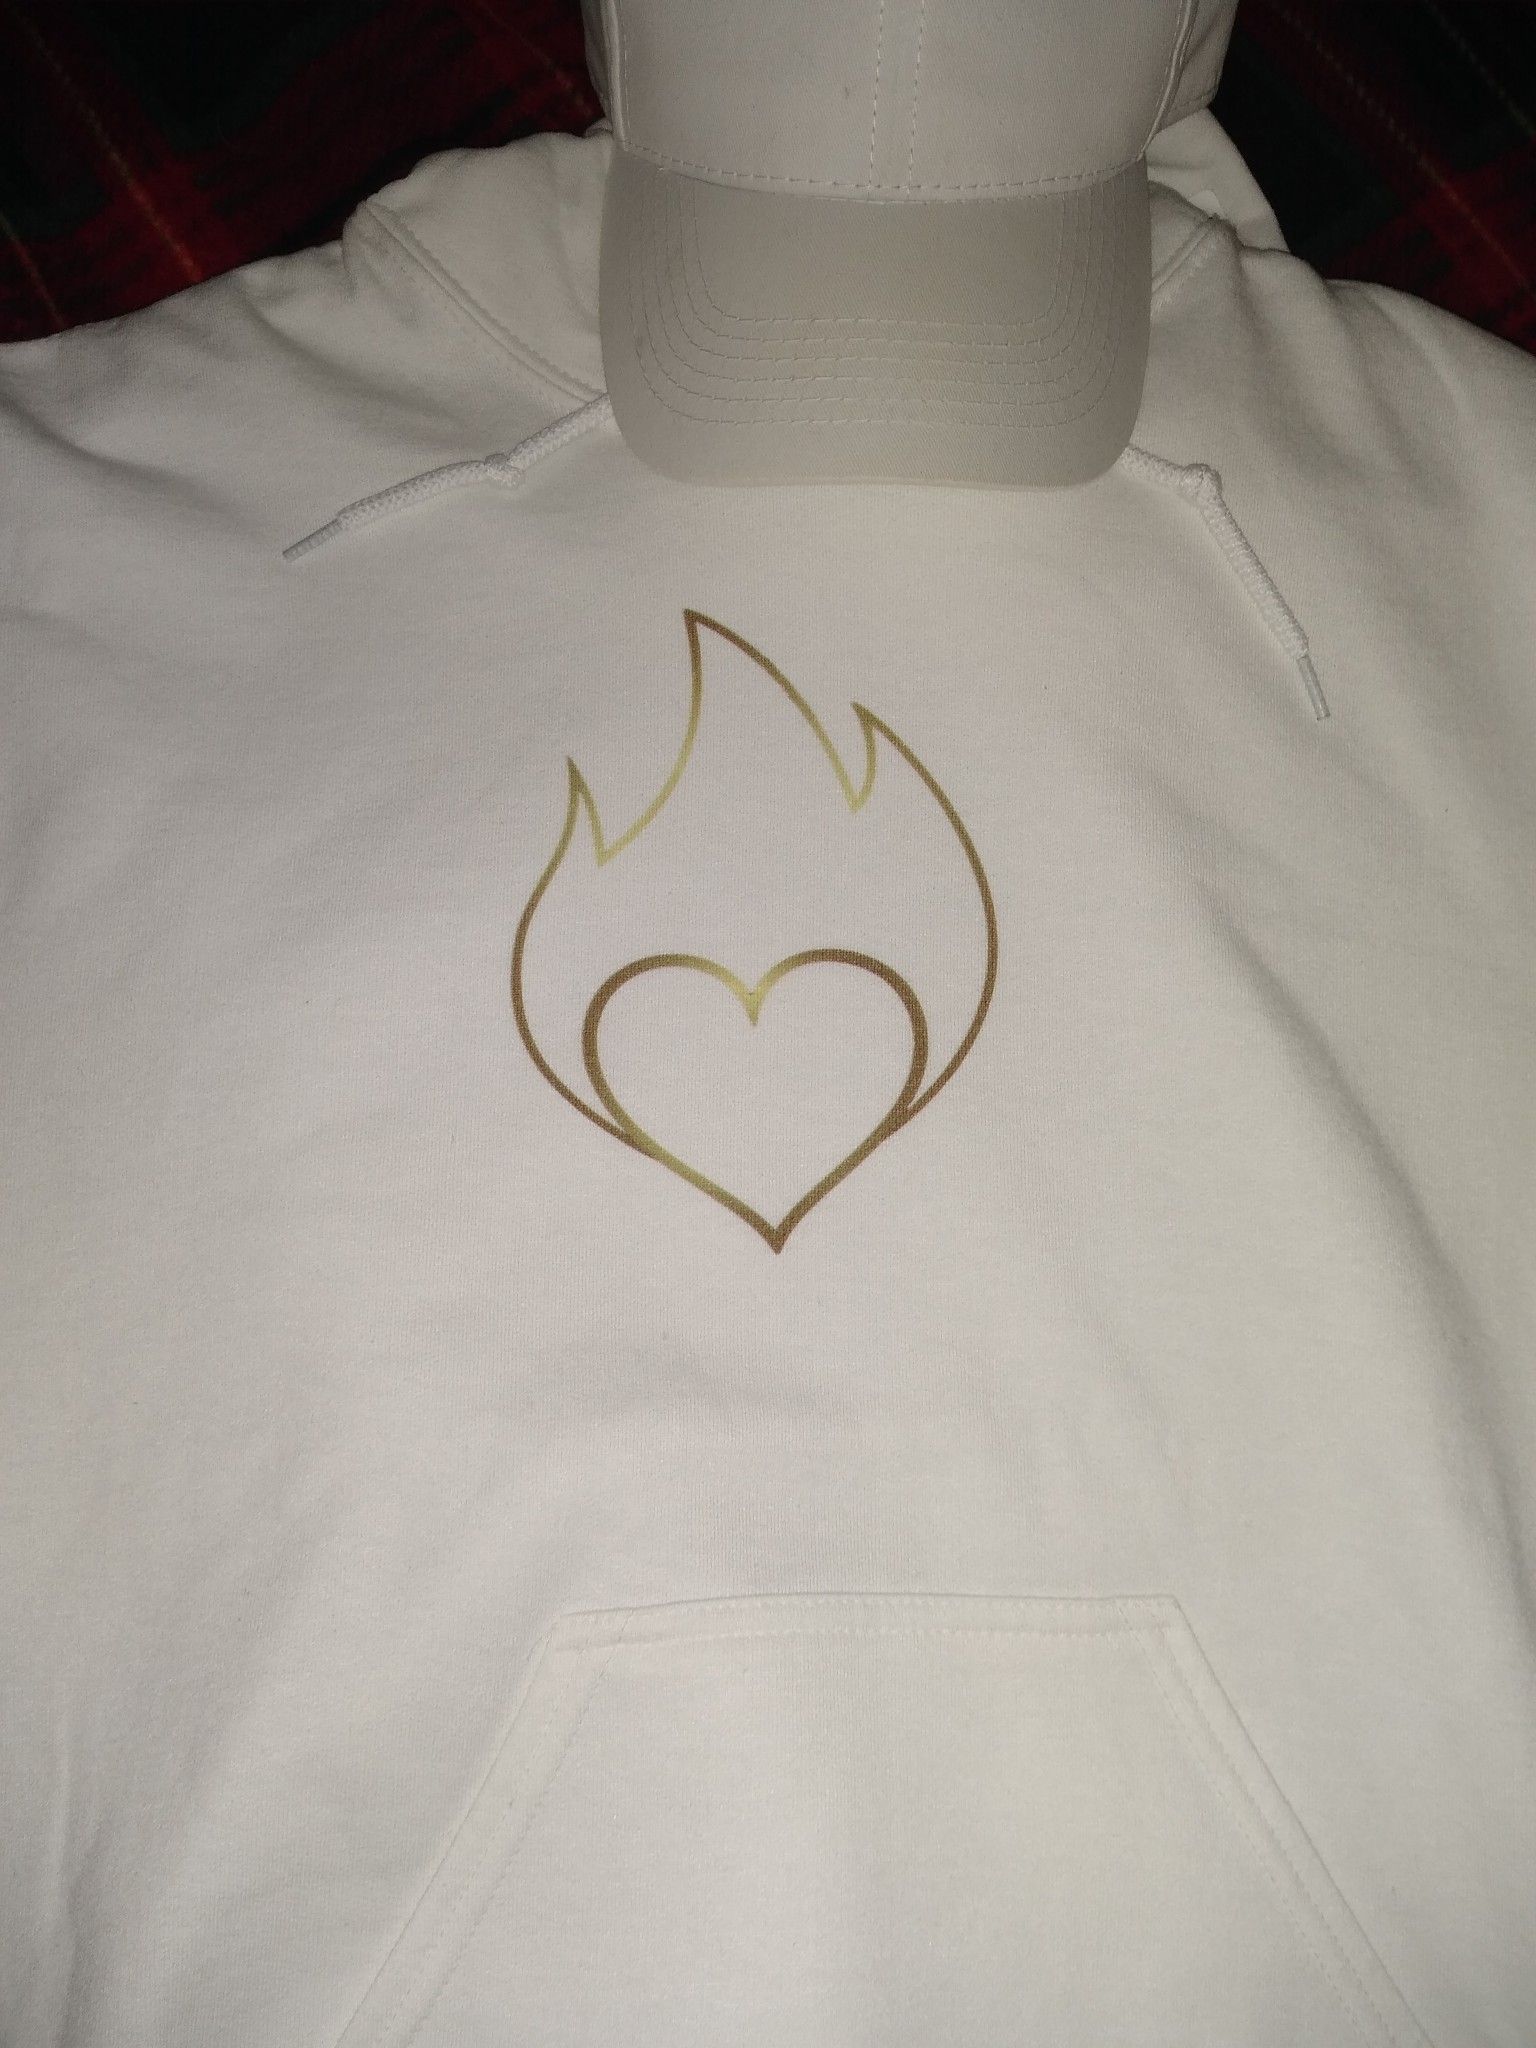 New Pullover Hoodie! "The fire is in love" Spanish language hoodie